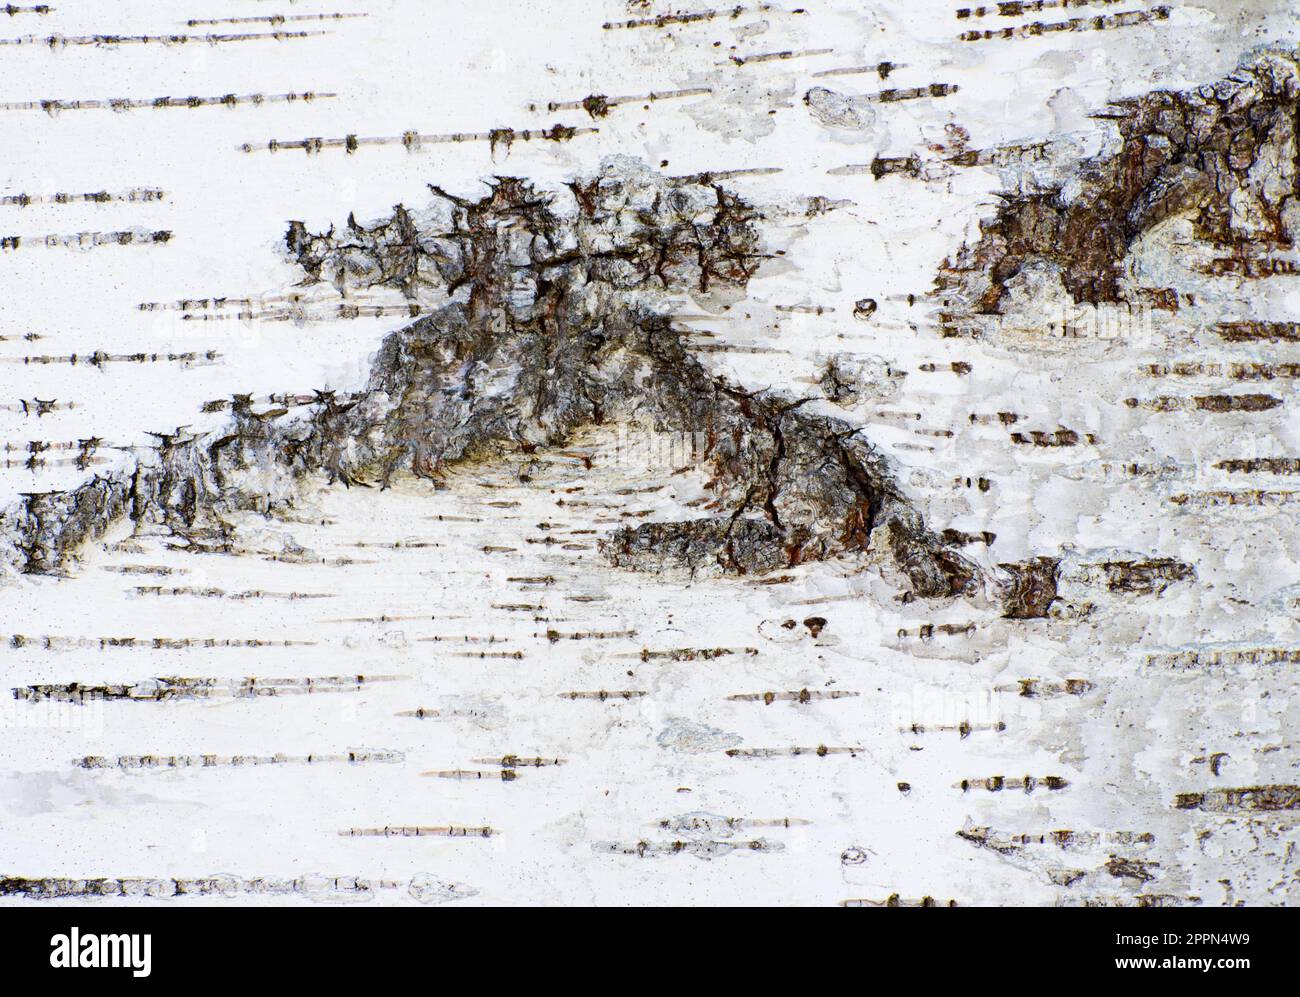 Abstract organic background of a white birch tree bark Stock Photo